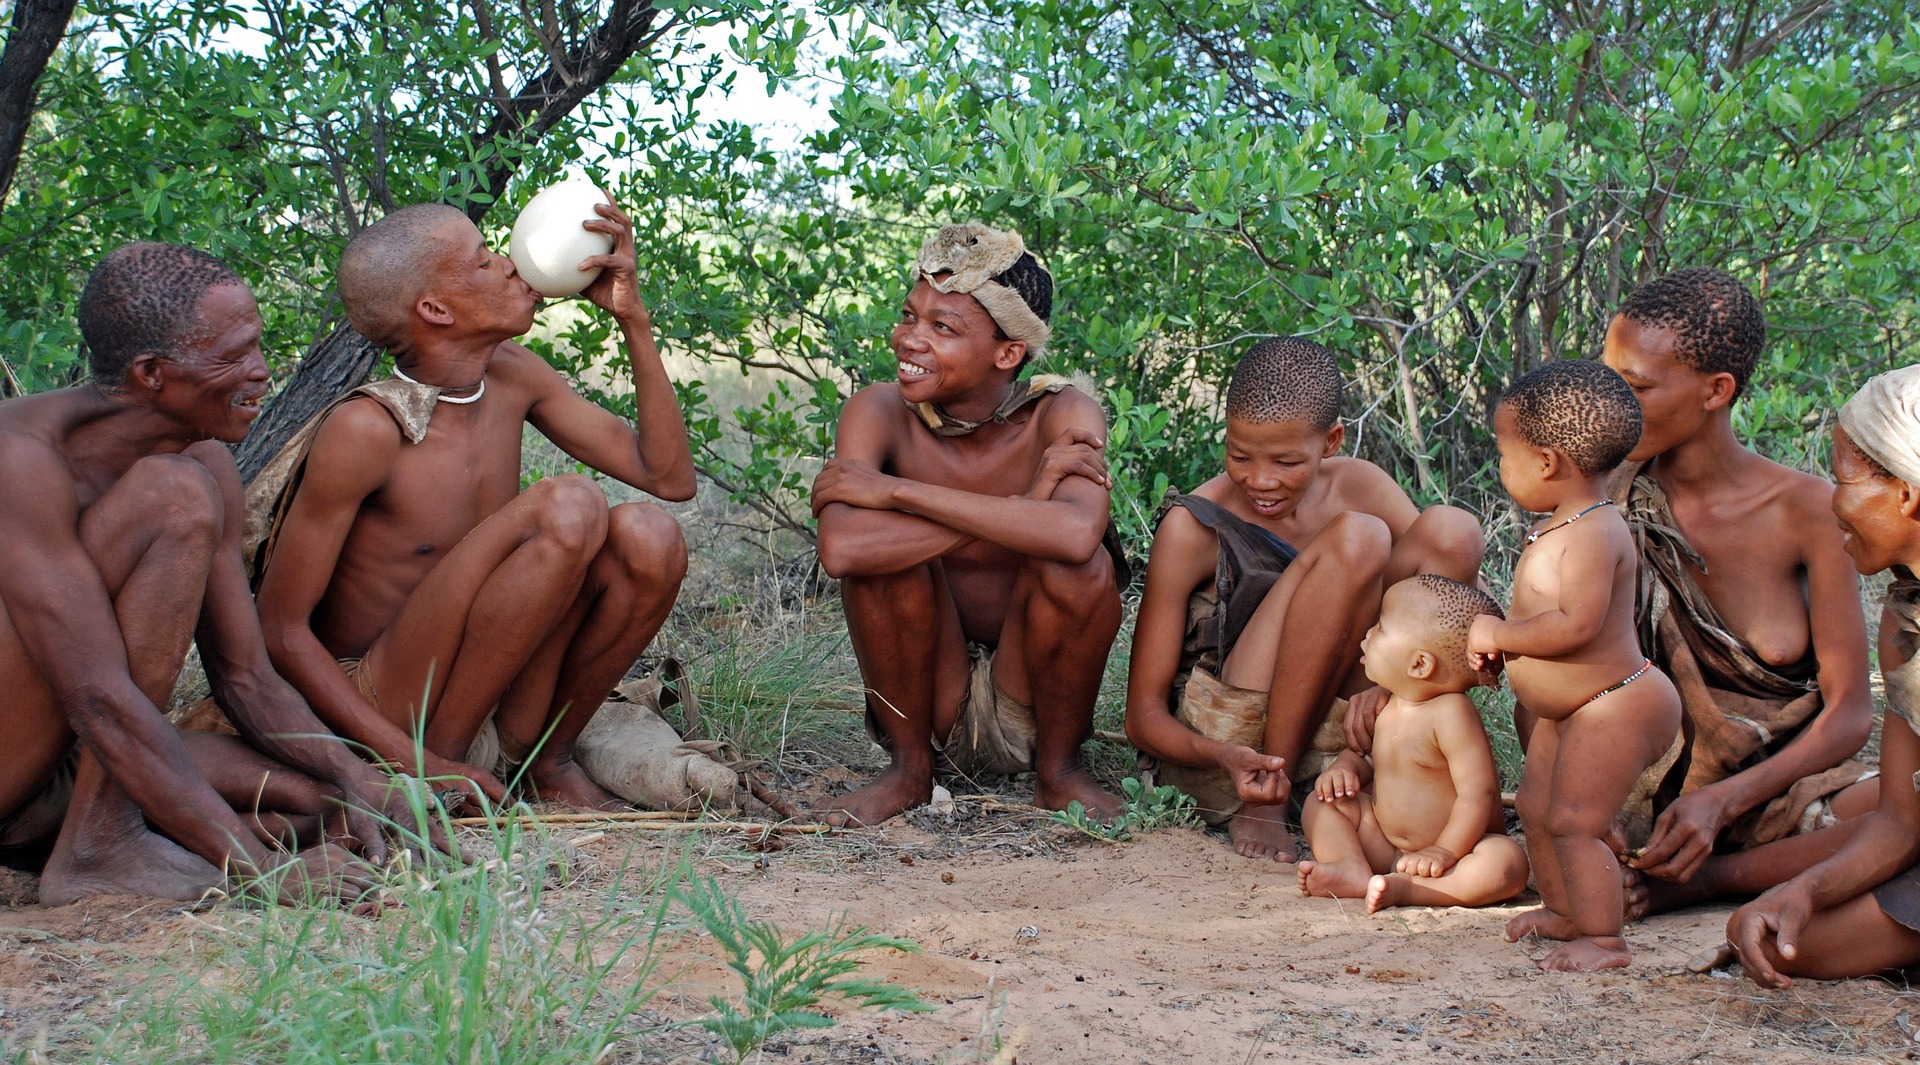 A group of San from southern Africa. They are happily squatting on the ground, exchanging smiles and joy. They are of all ages, from old, to baby.